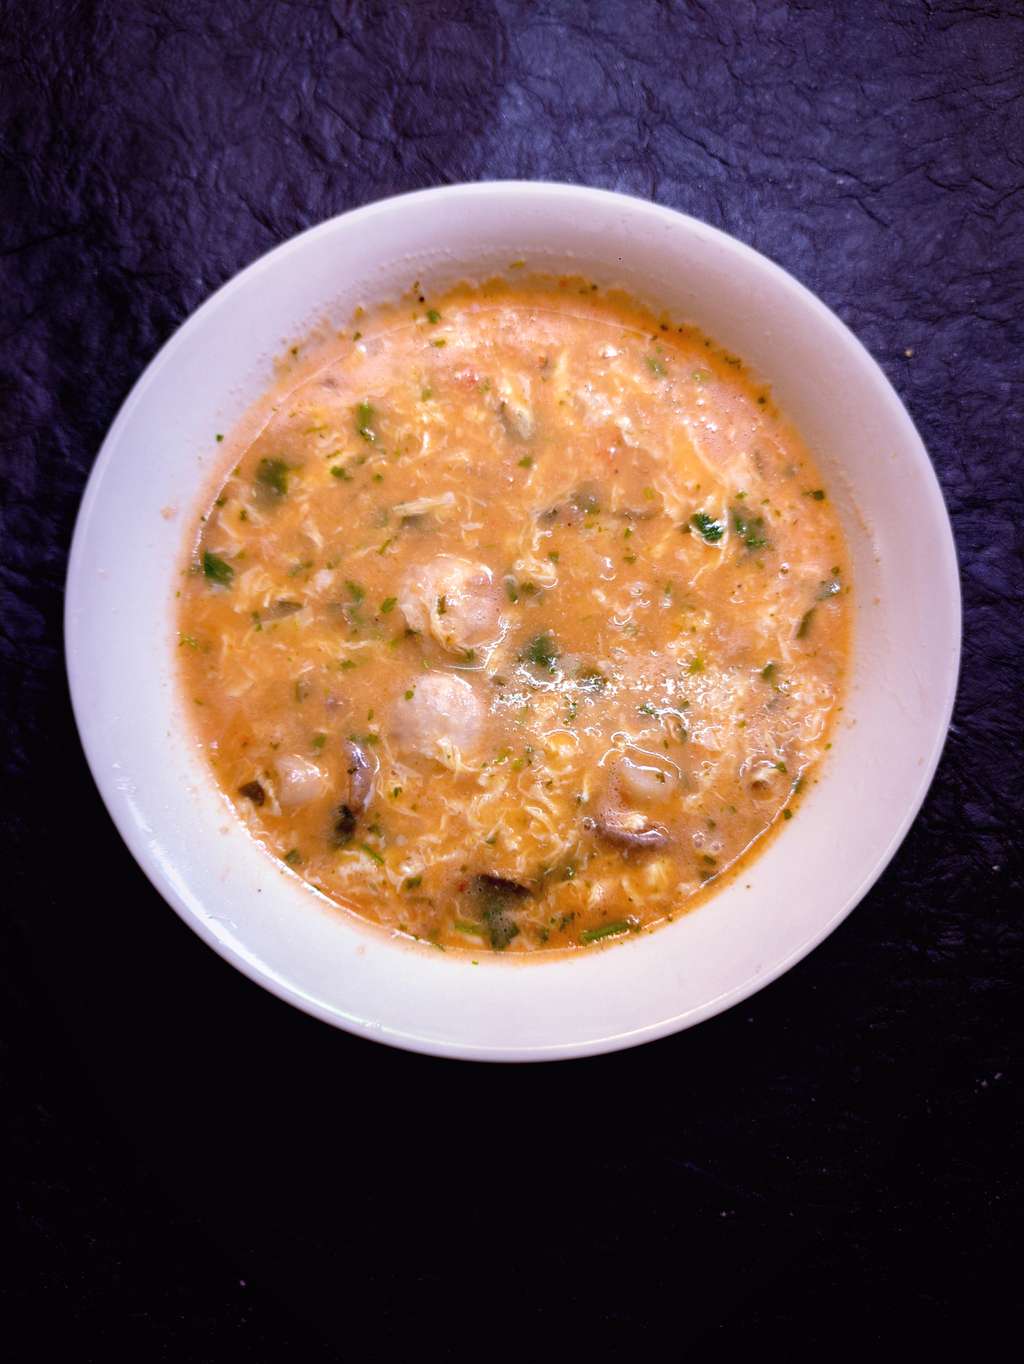 High Protein Tomato Egg Drop Soup (Low Calorie! Very filling!)